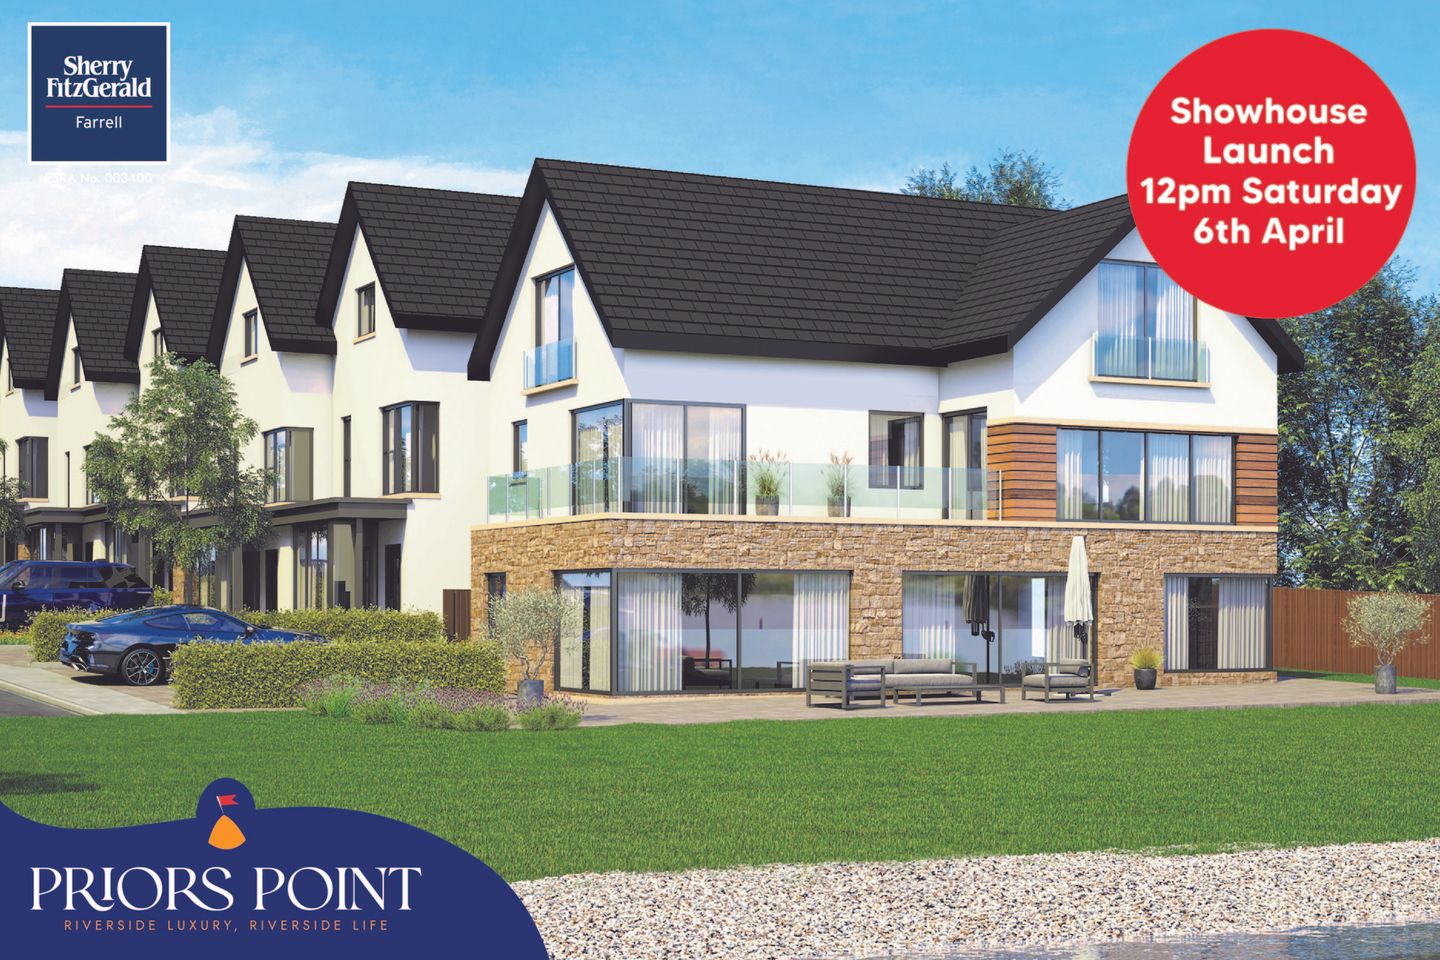 Type C - Mid-Terrace, Priors Point, Priors Point, Attirory, Carrick-on-Shannon, Co. Leitrim